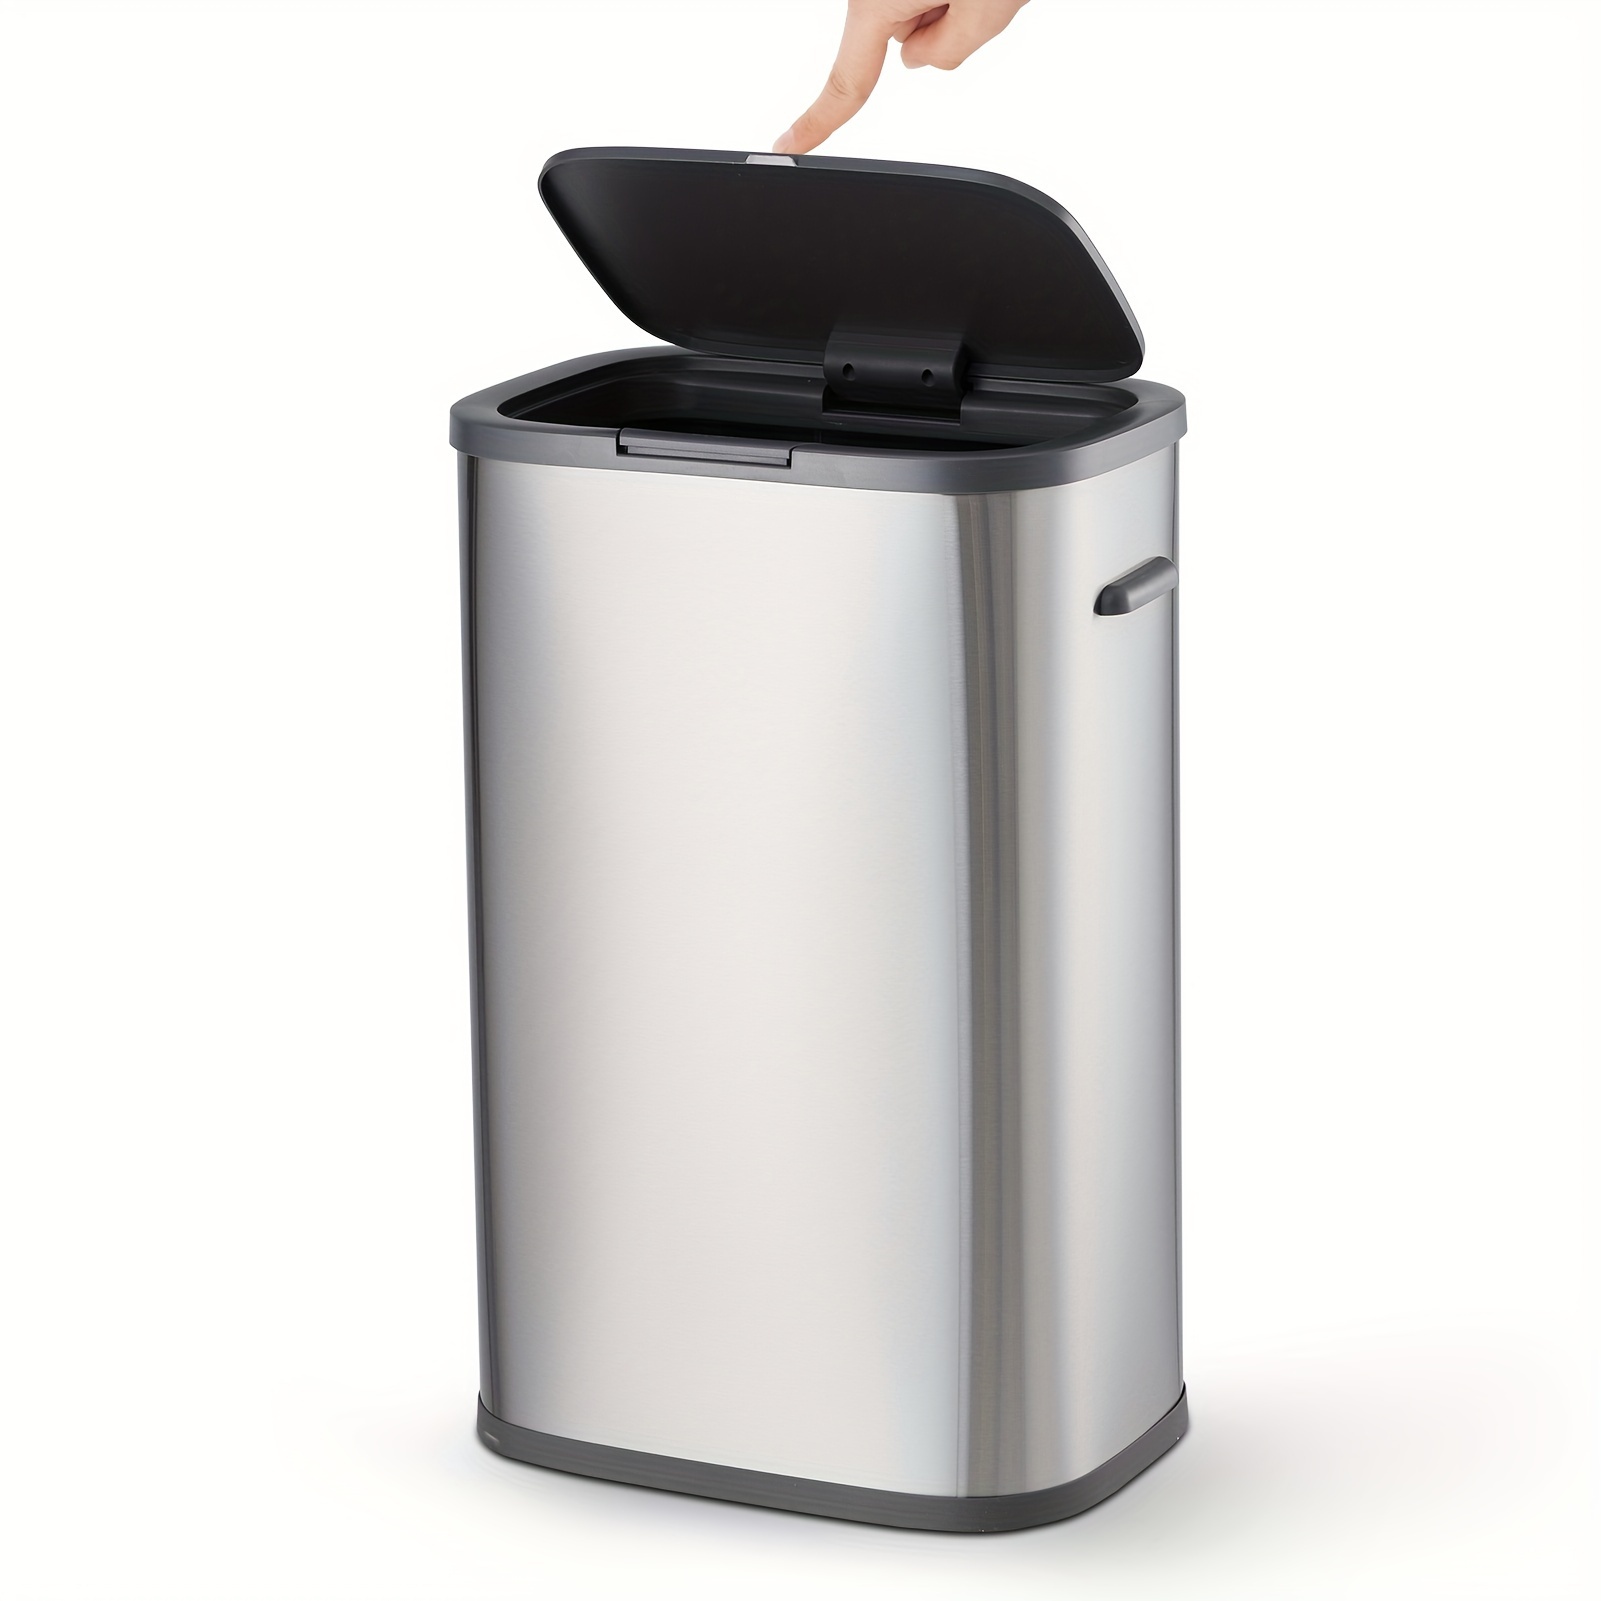 

1pc Trash Can With Lid, Garbage Can With Pop-up Lid, 55l/14.5gal Trash Bin, Waste Basket For Bedroom, Office